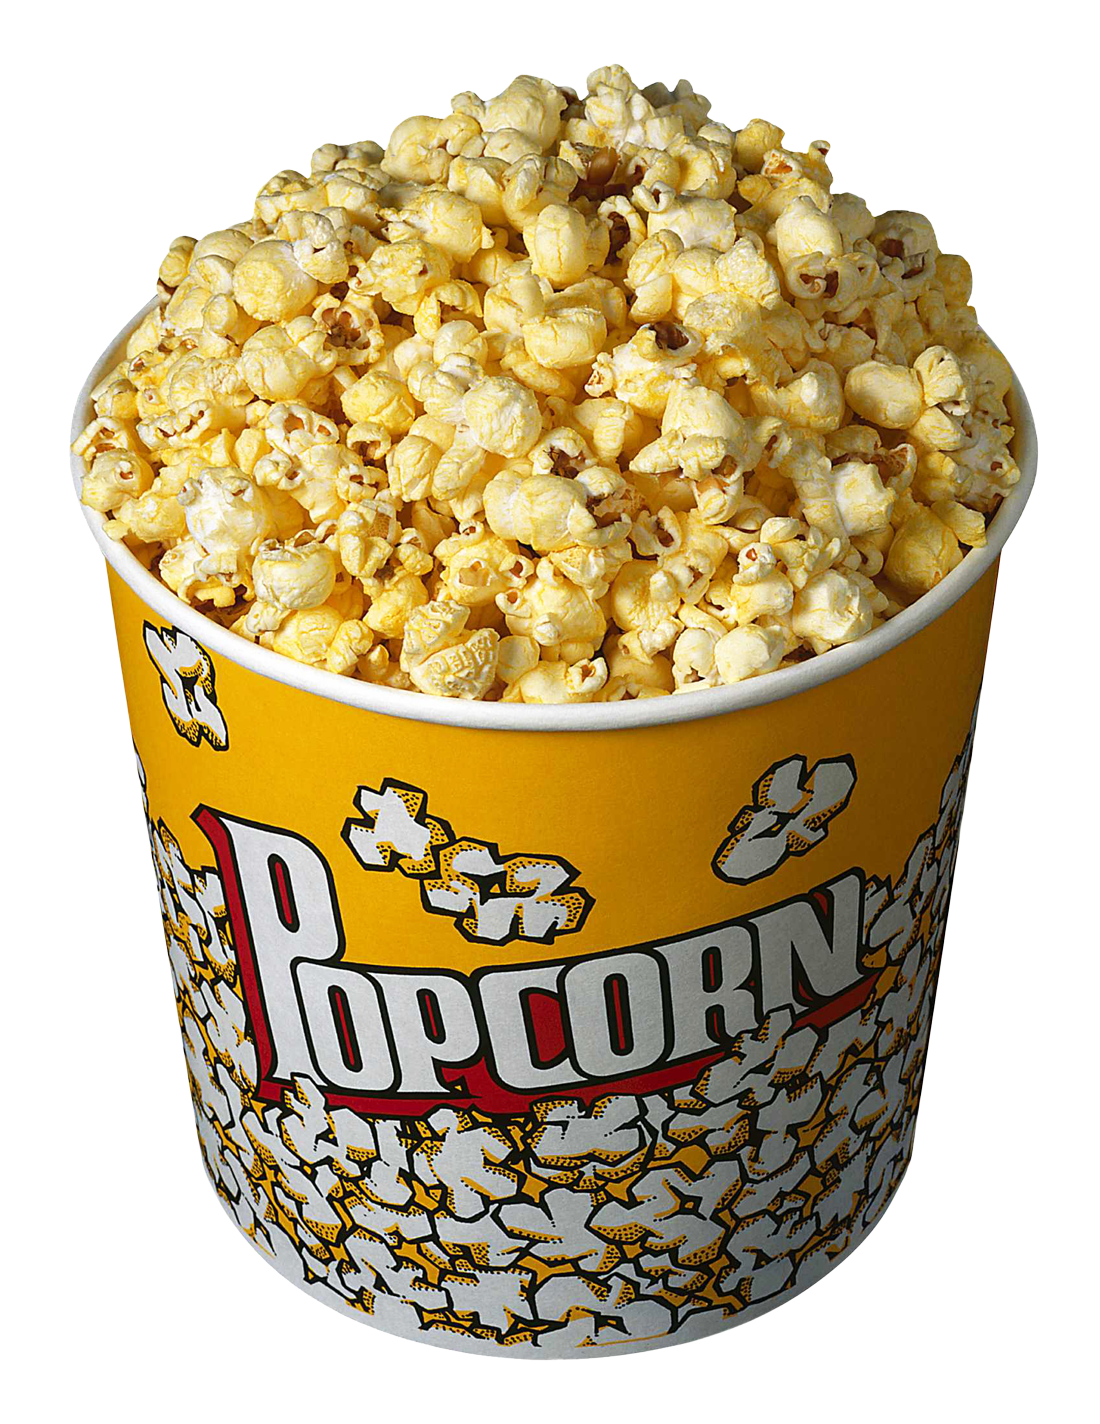 Buttered Popcornin Yellow Bucket PNG